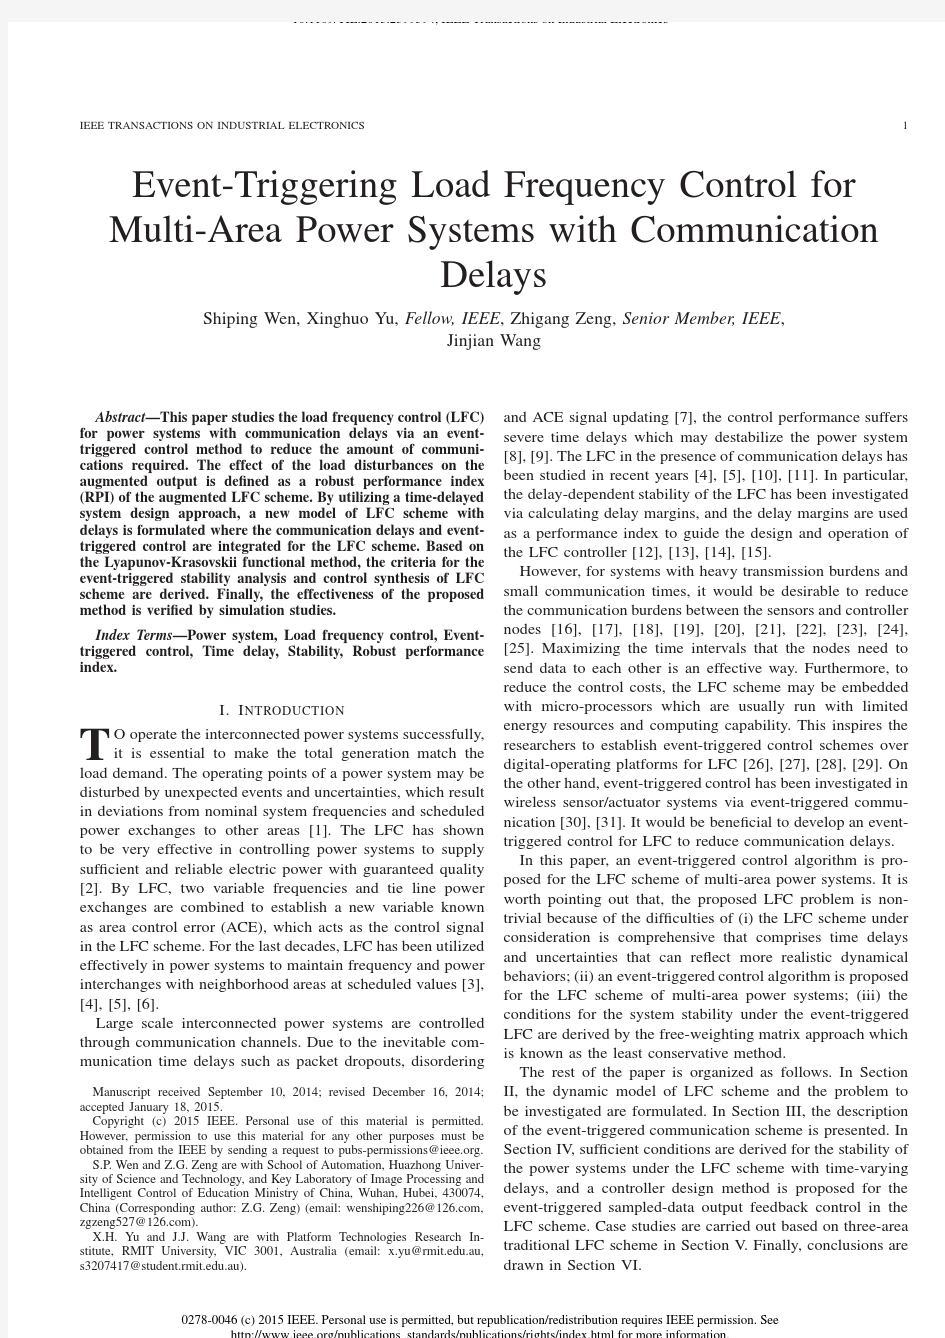 Event-Triggering Load Frequency Control for Multi-Area Power Systems with Communication Delays